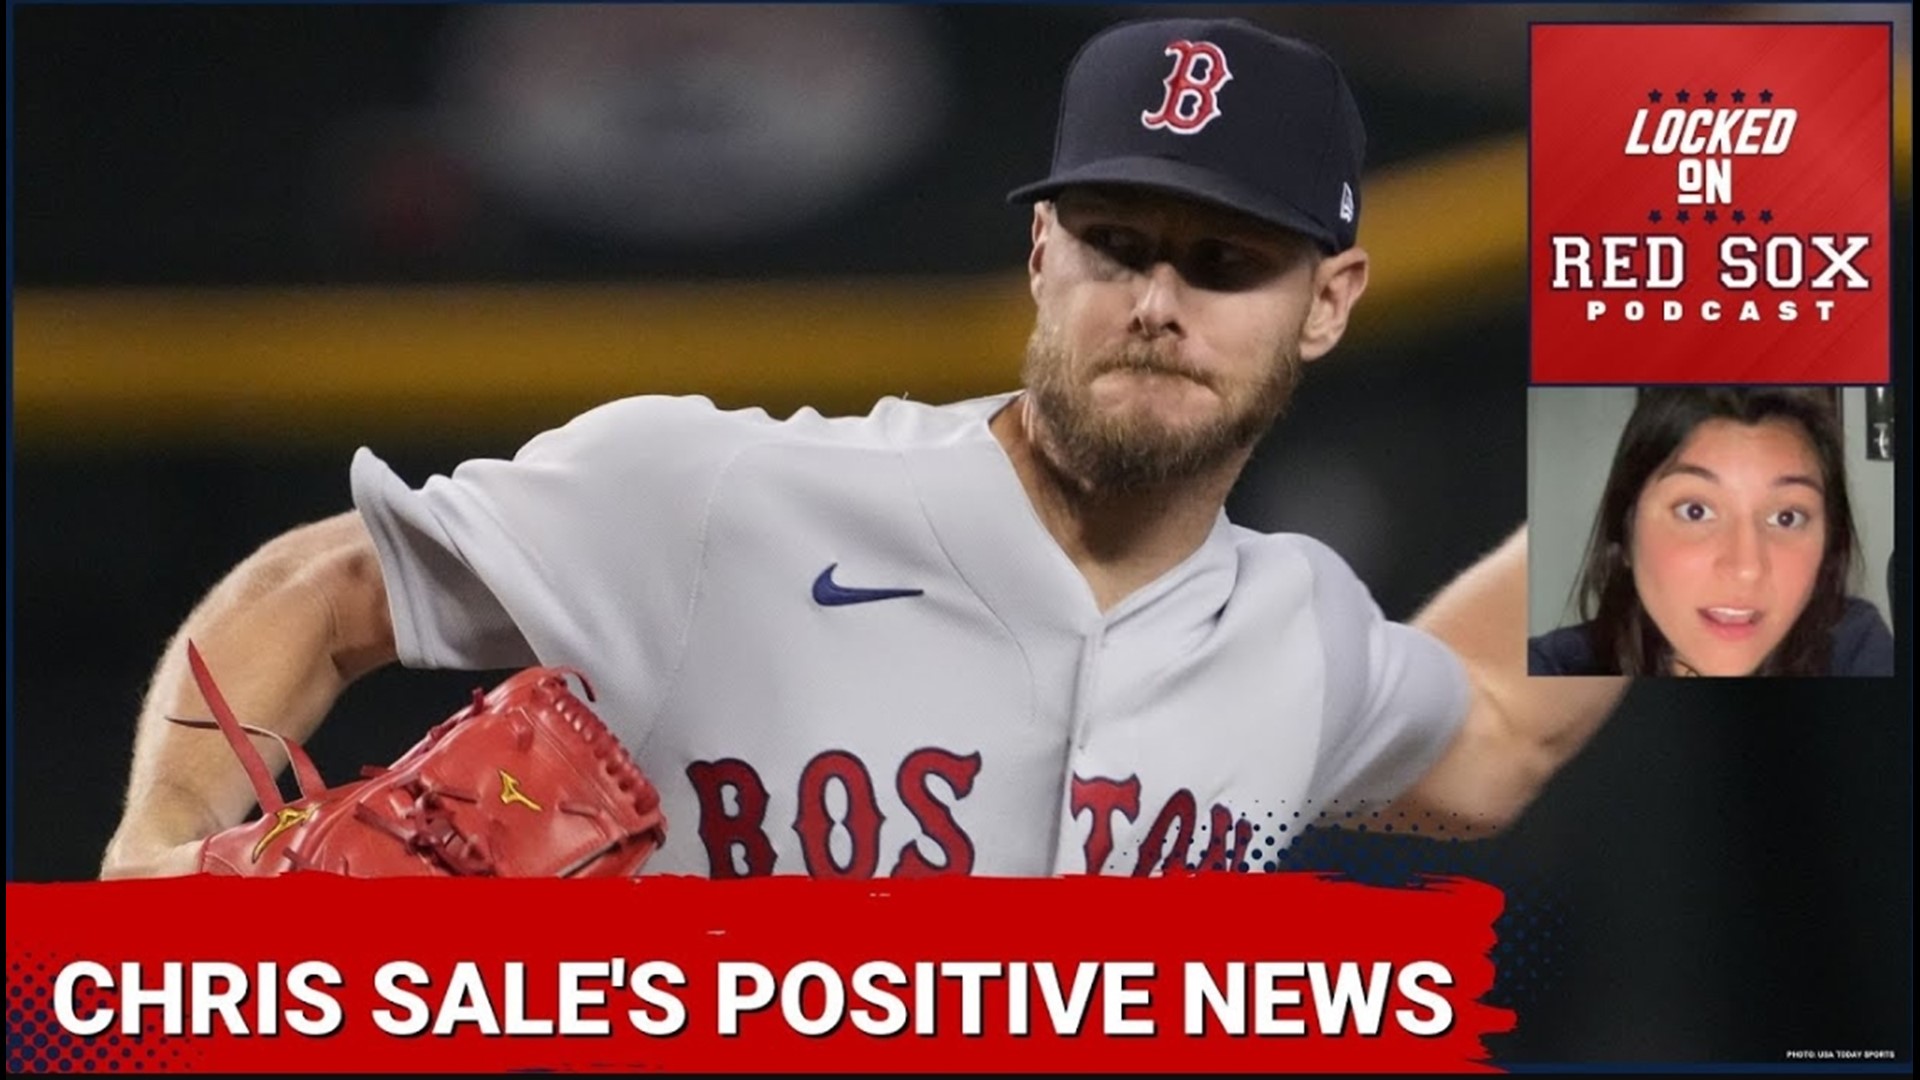 Chris Sale Receives Positive Injury Update as He Continues to Eye a Return, Locked On Red Sox